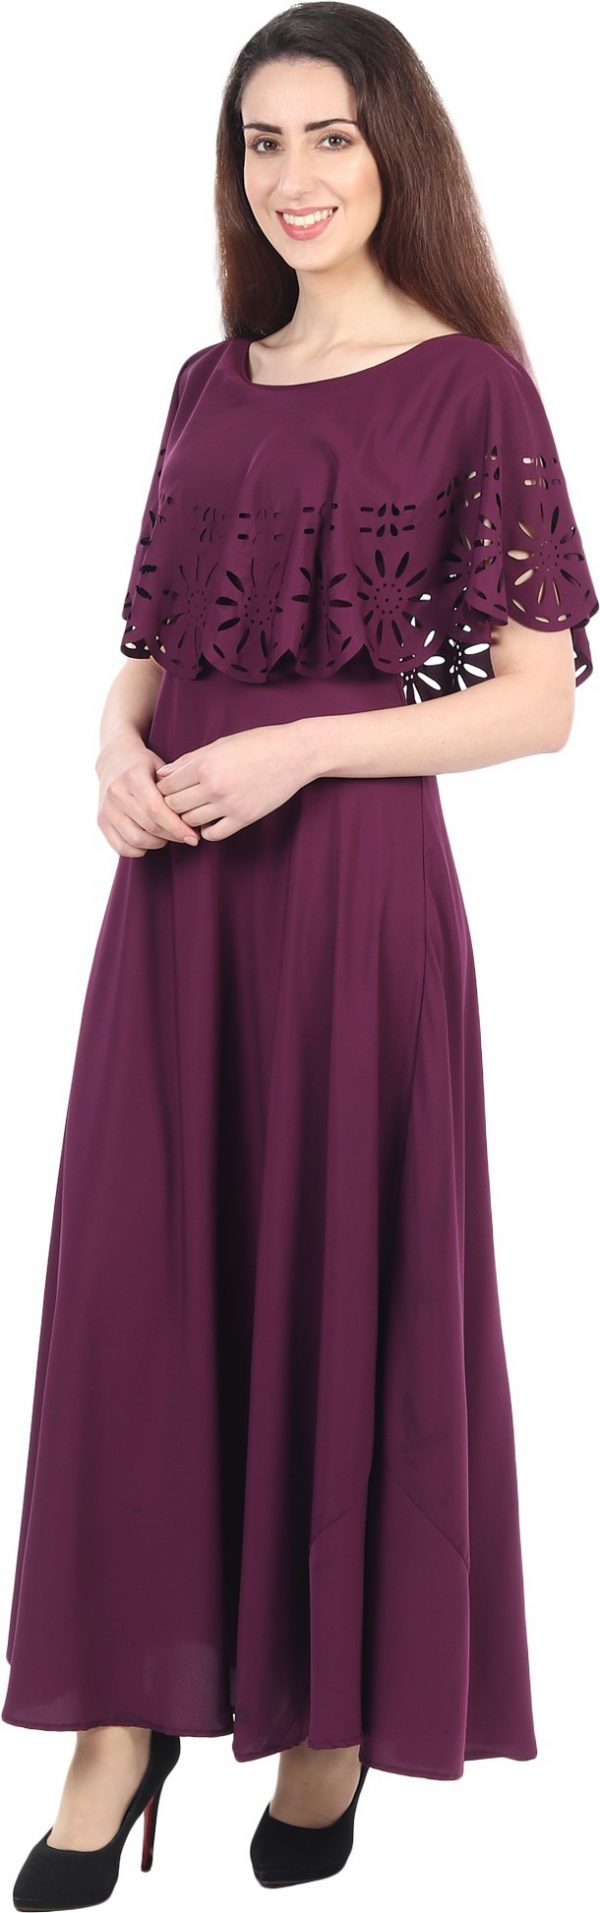 FF-WMYKUOVS-Self Design Crepe Blend Stitched Flared/A-line Gown (Purple)